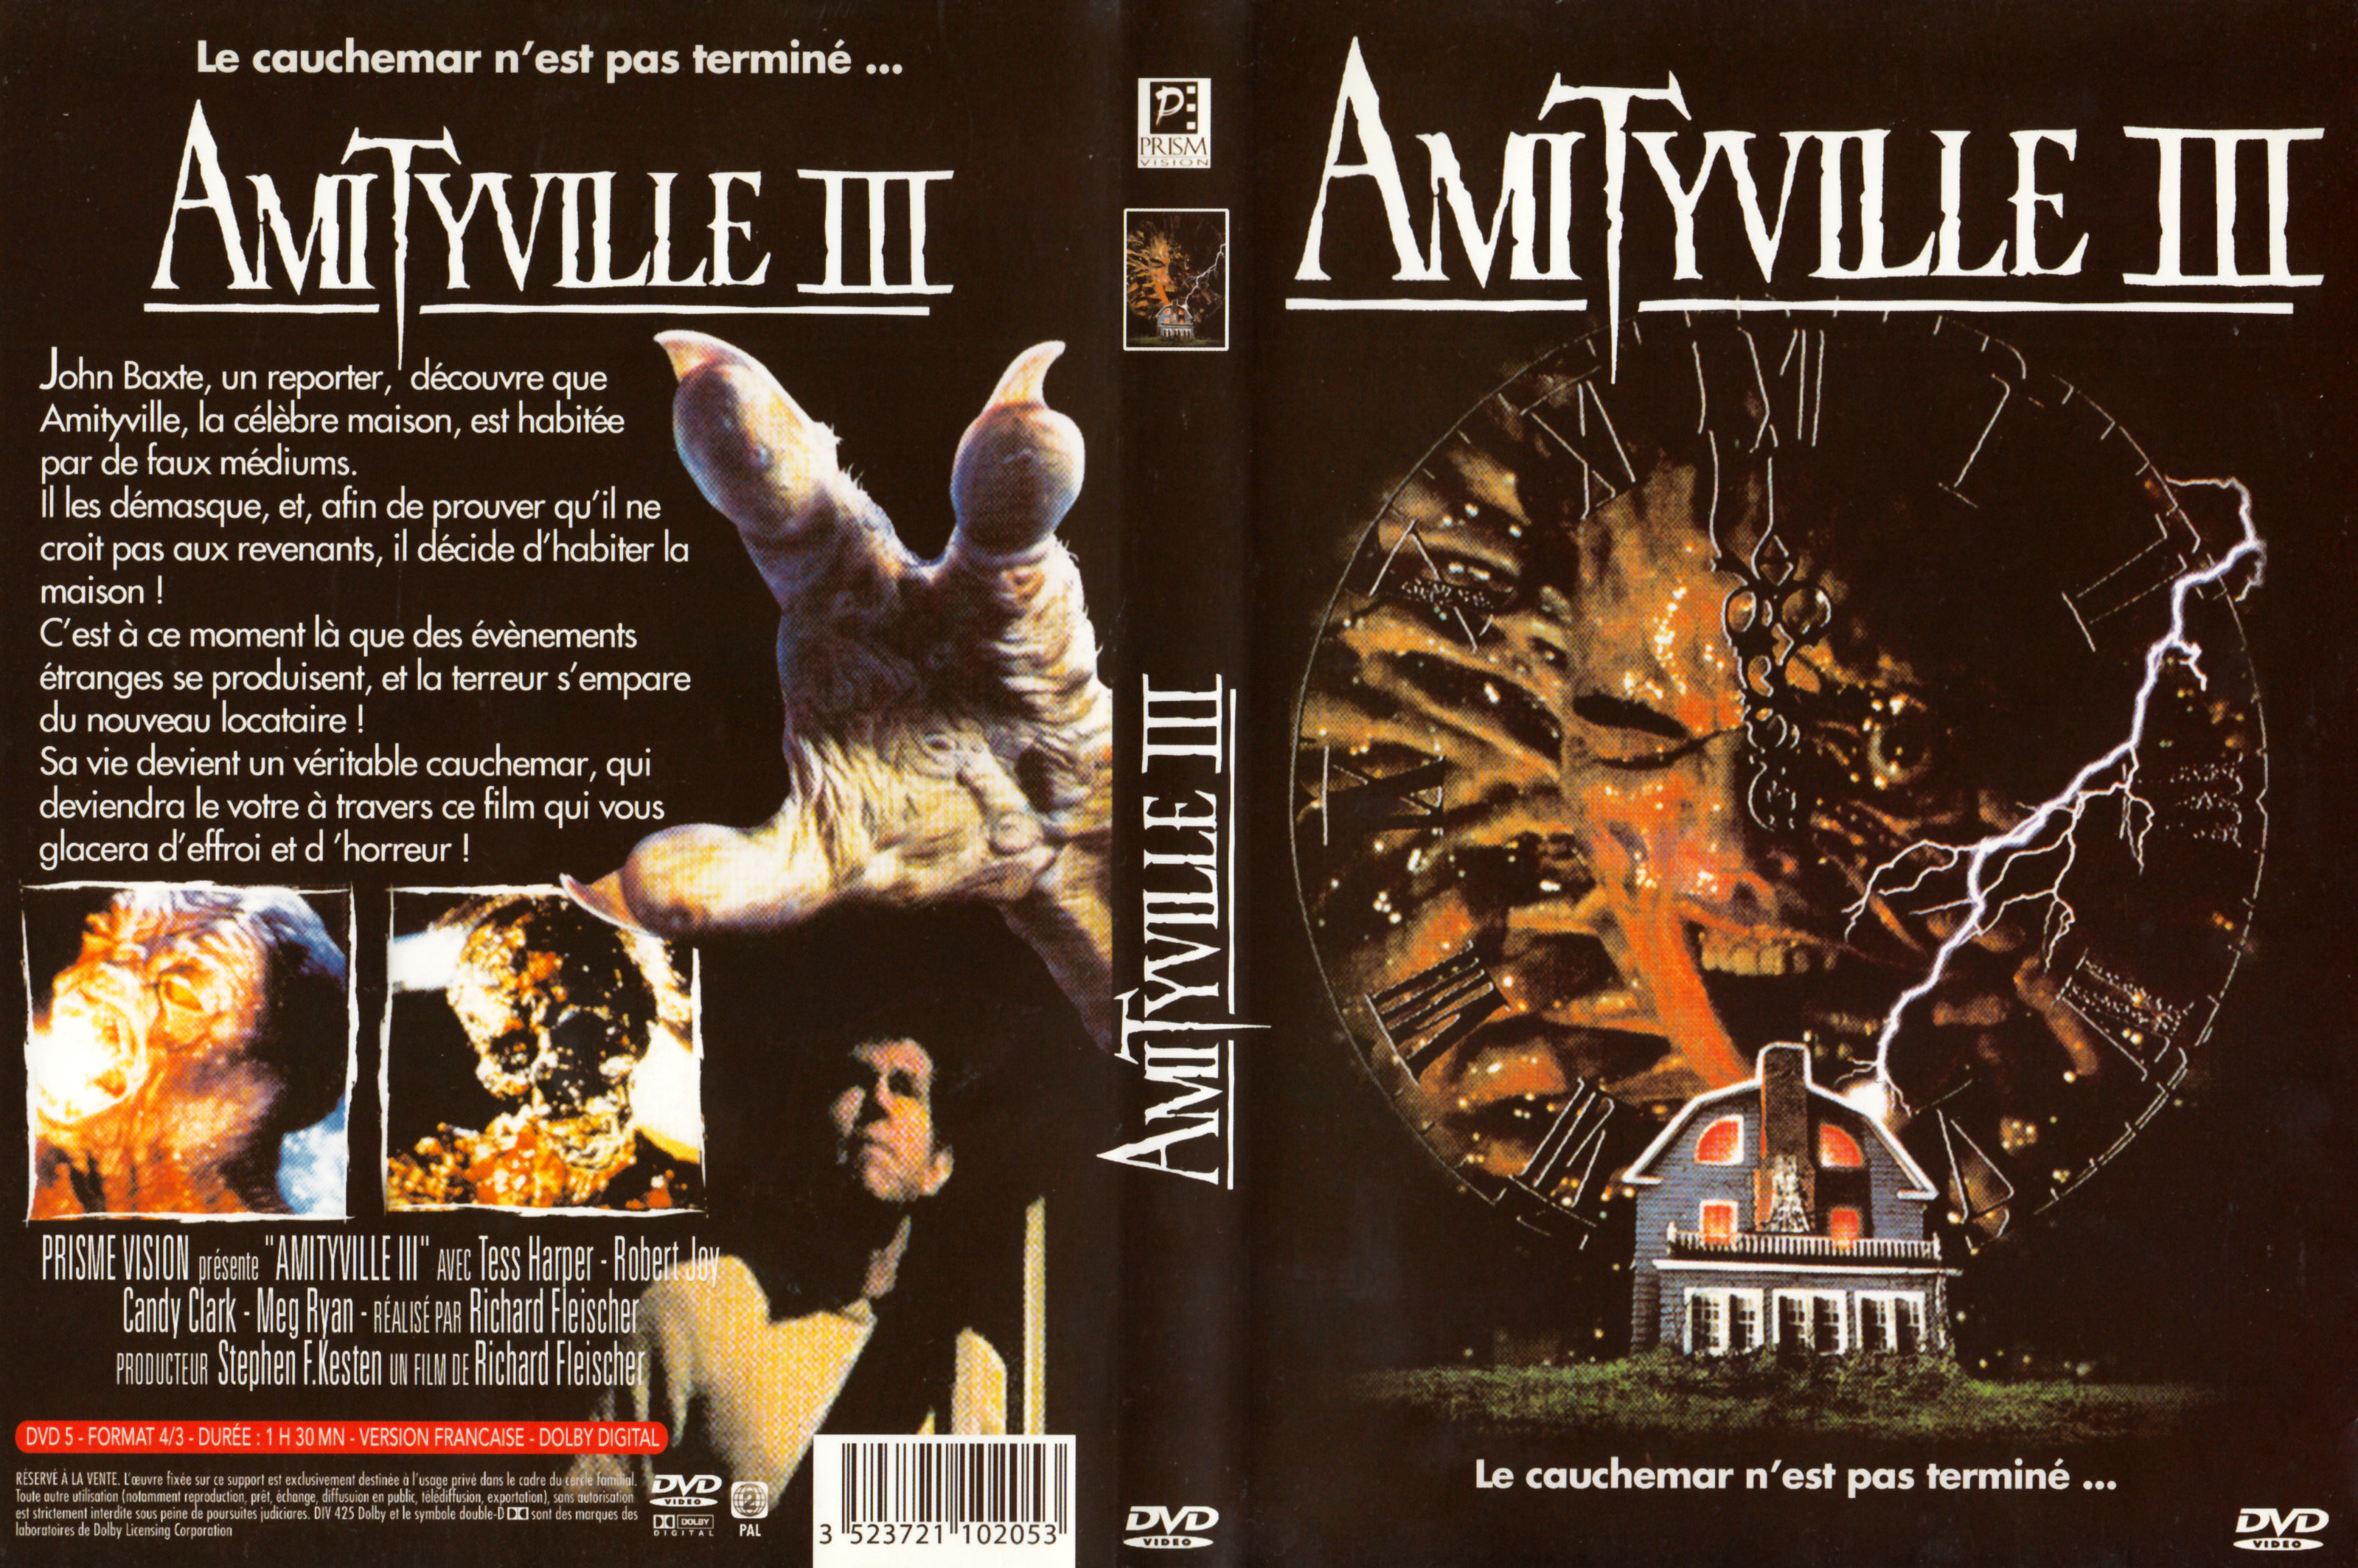 Jaquette DVD Amityville 3 v4